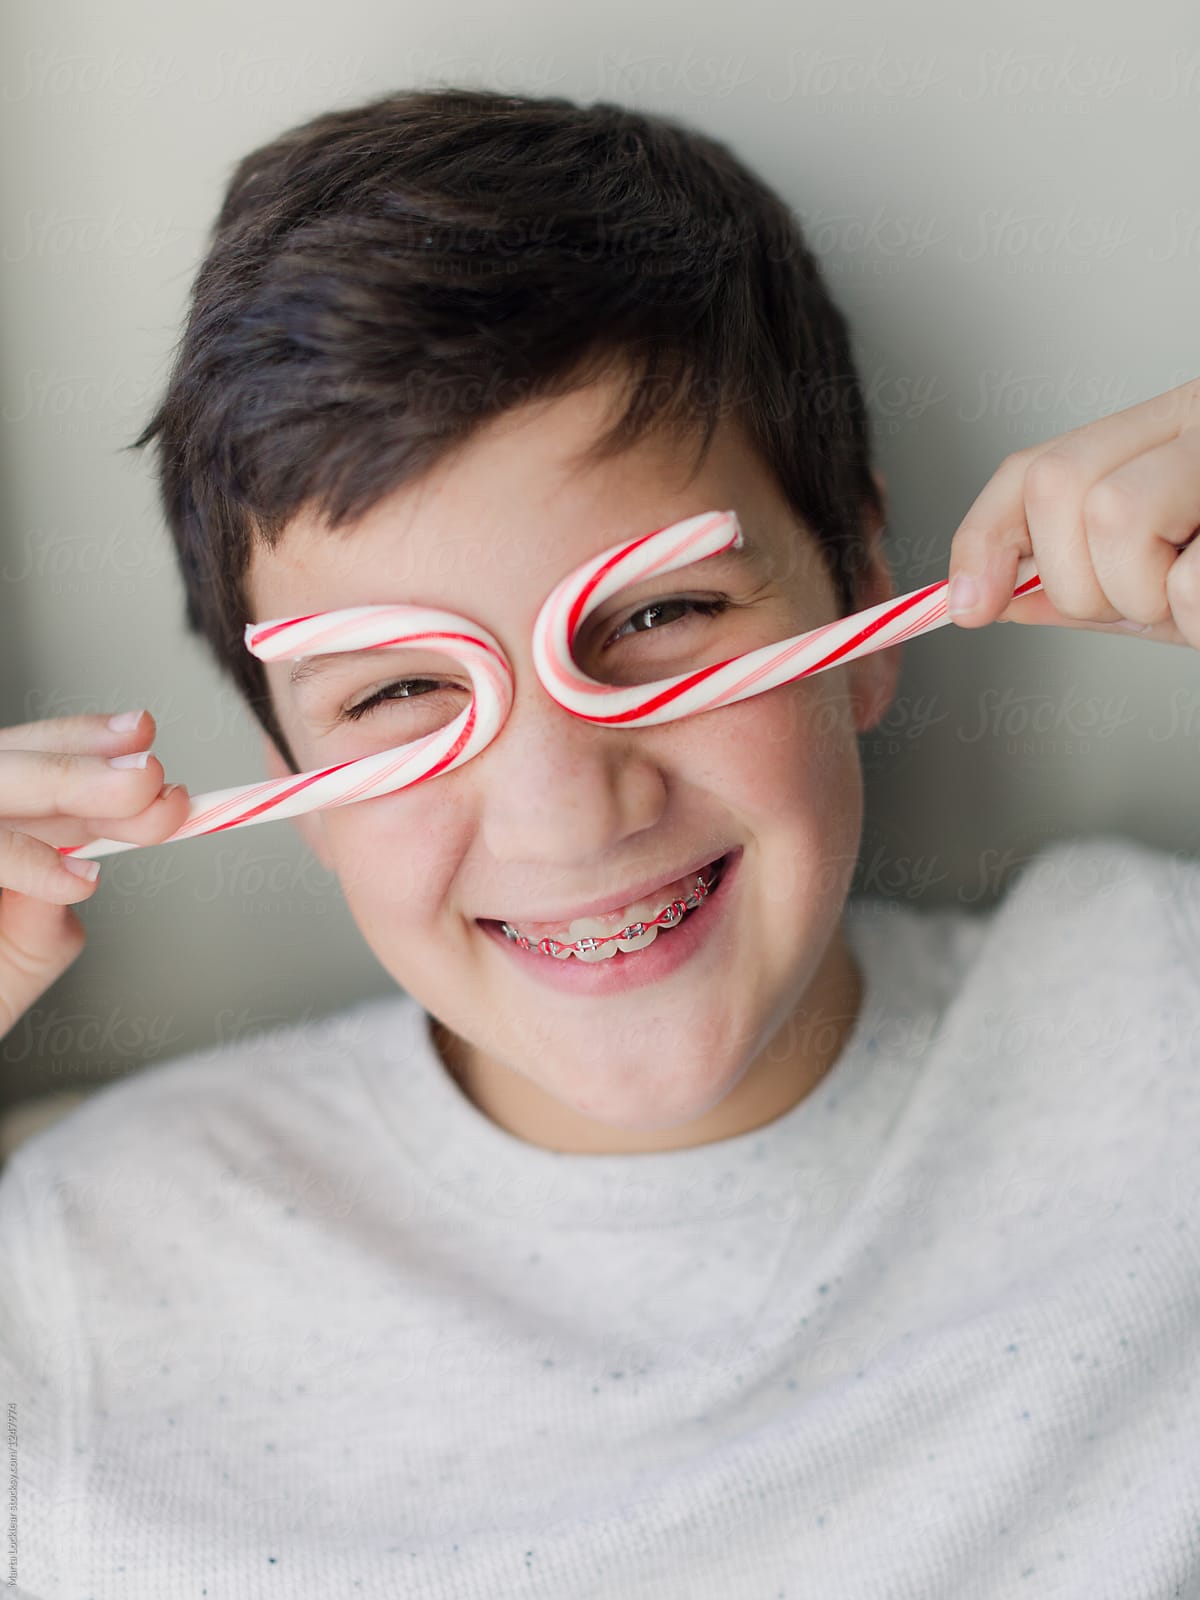 Candy Cane Kid